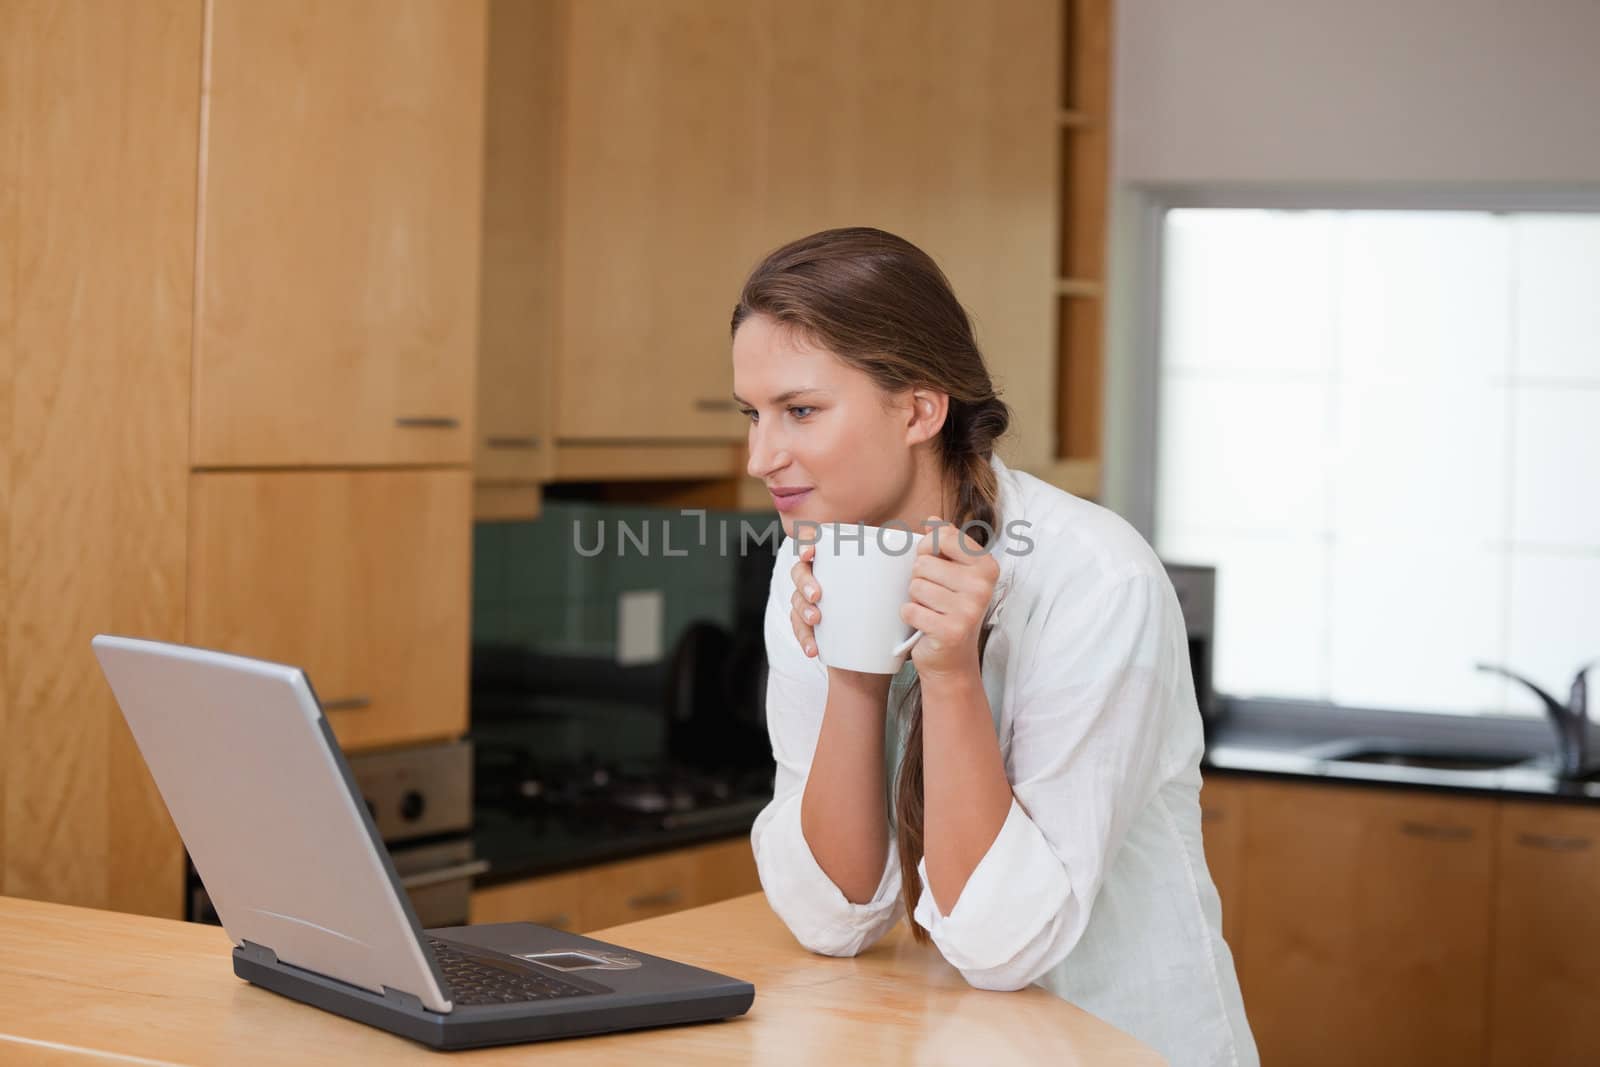 Woman looking at a computer while holding a cup in a kitchen 